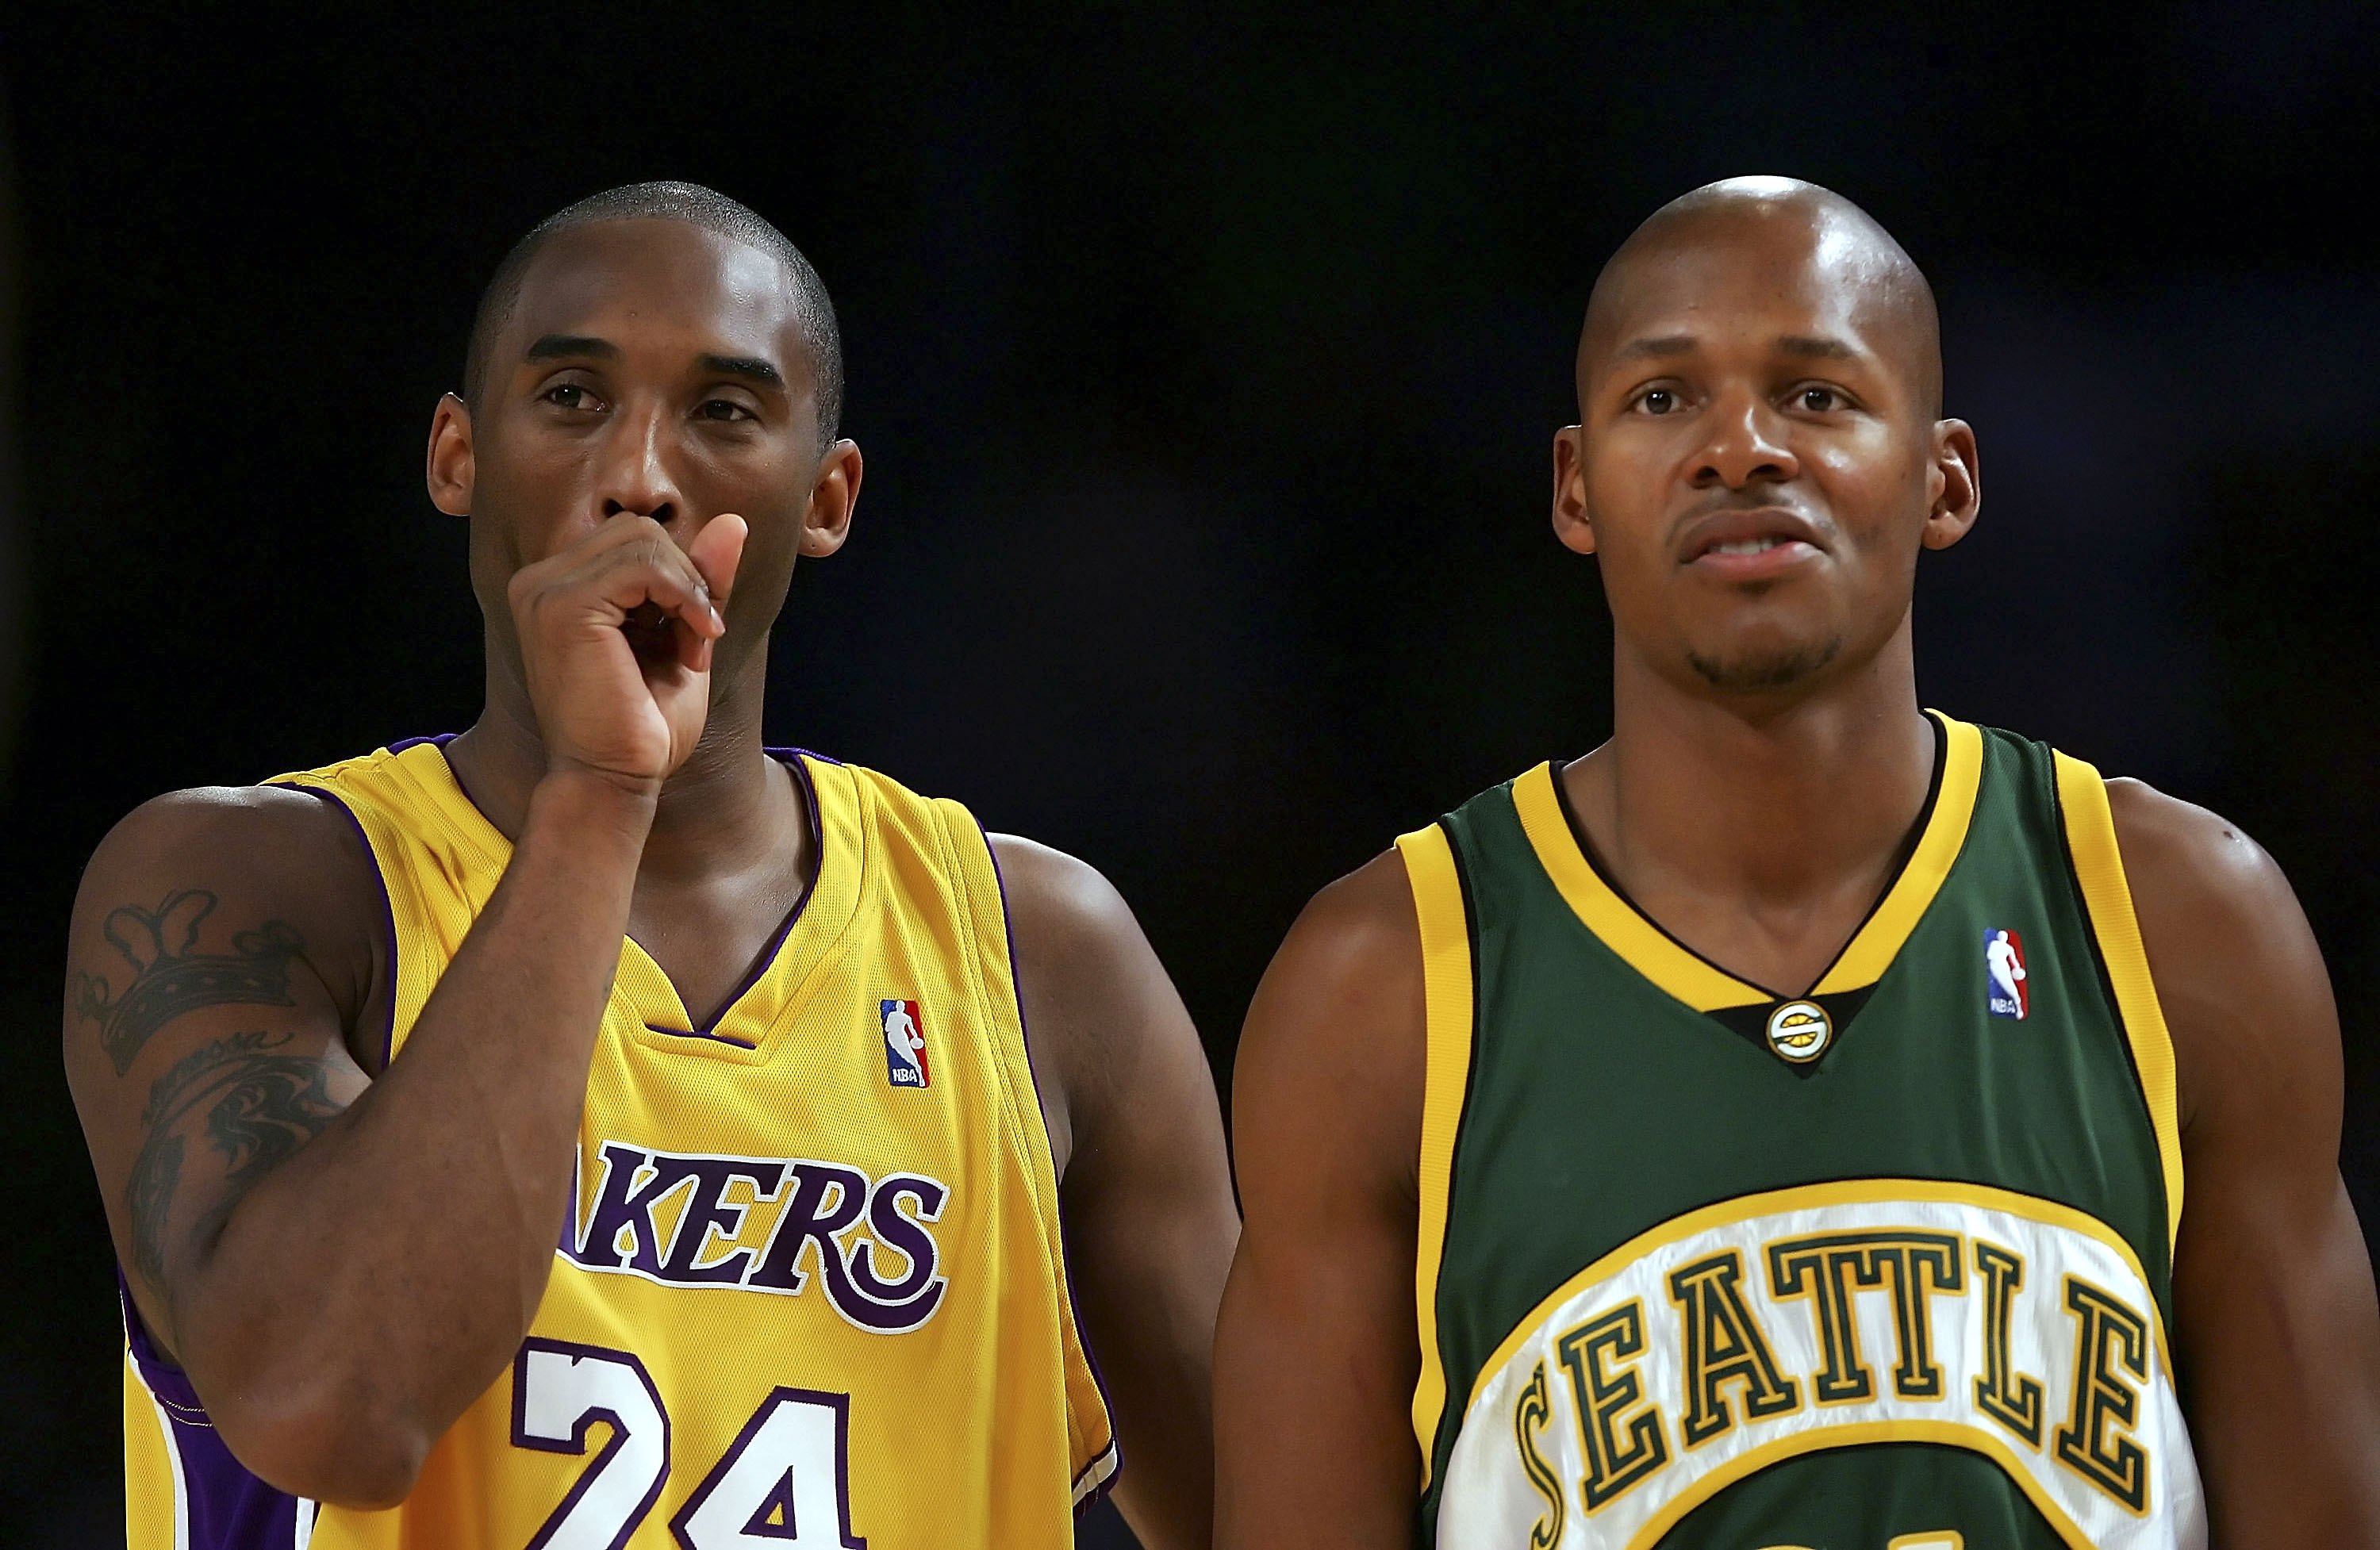 Kobe Bryant stands next to Ray Allen during a 2006 NBA game between the Los Angeles Lakers and Seattle SuperSonics